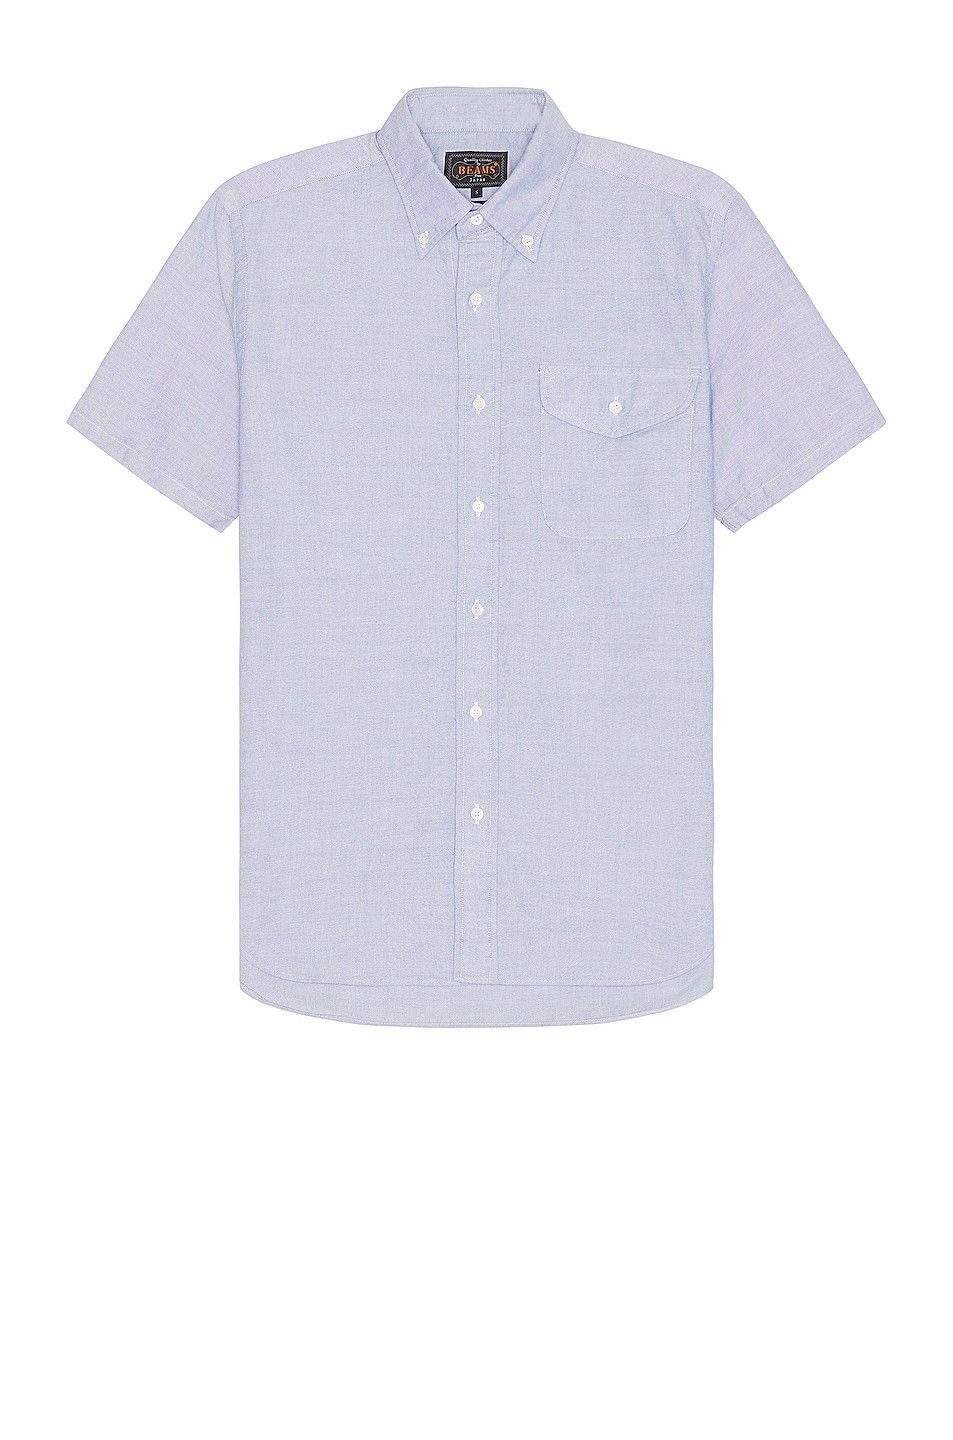 Image 1 of Beams Plus B.d. Short Sleeve Oxford Shirt in Sax